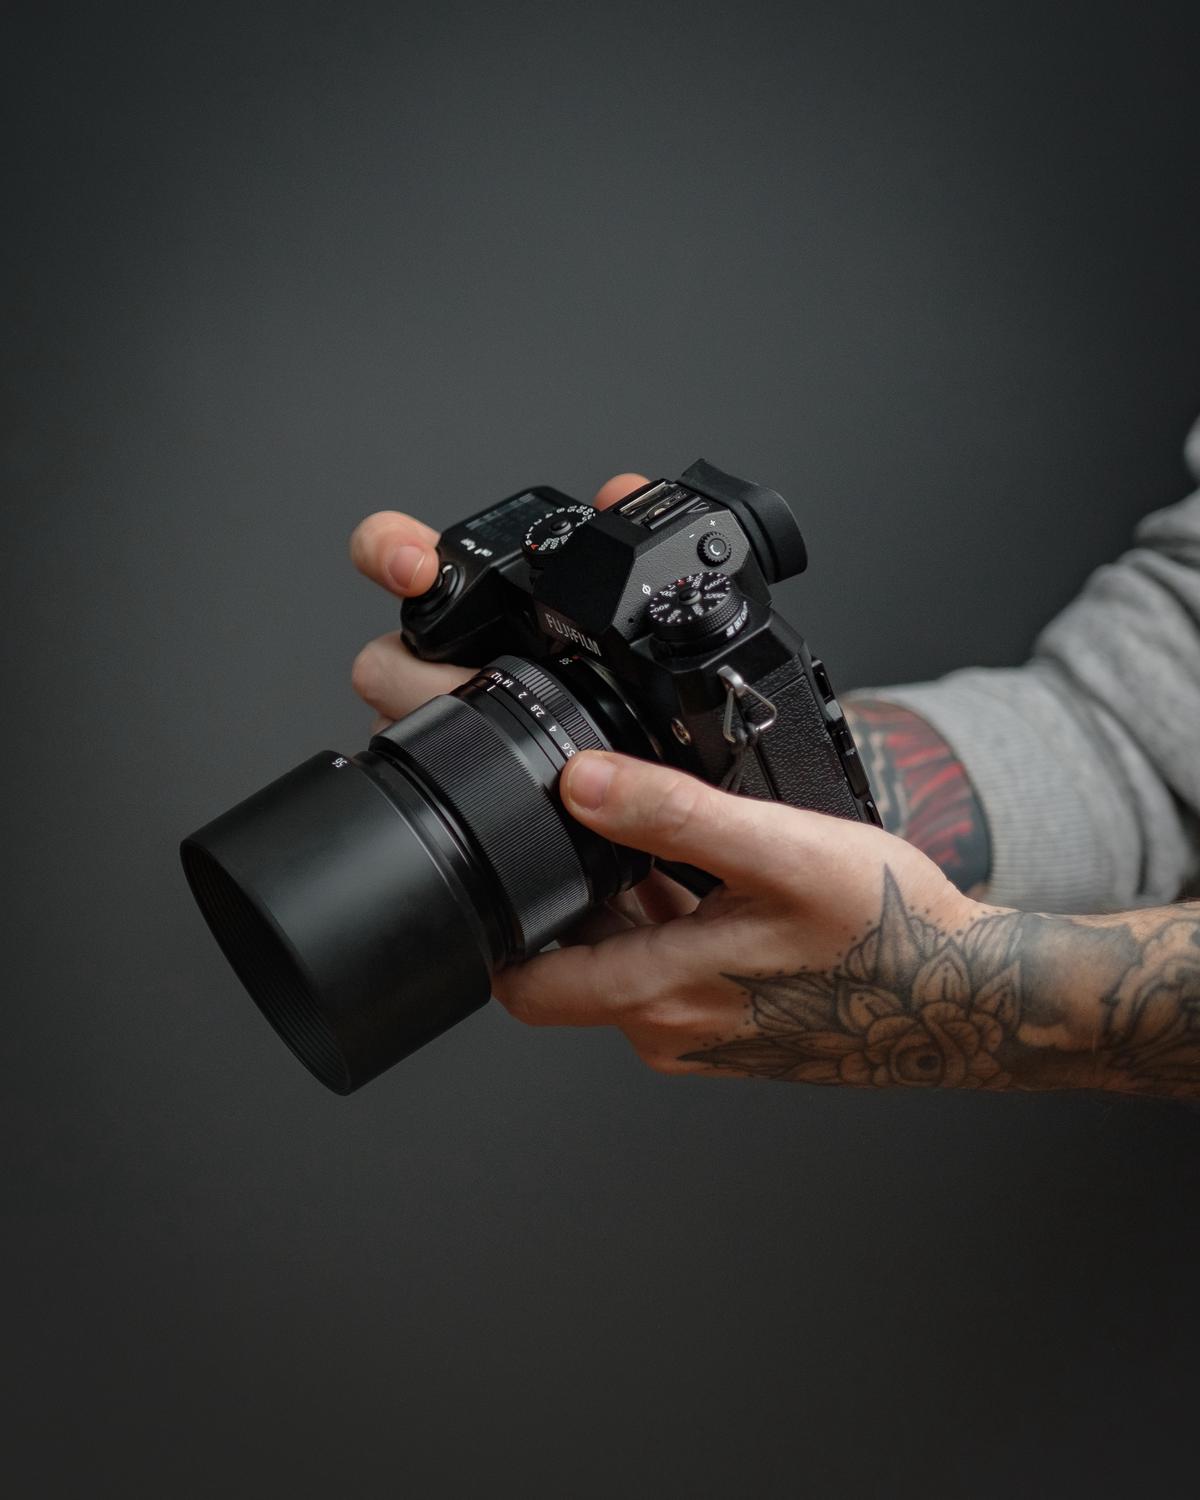 A DSLR camera and lenses, a mirrorless camera and lenses, and a point-and-shoot camera with the caption 'Popular Lens Choices for Travel Photography' written on a blurred background